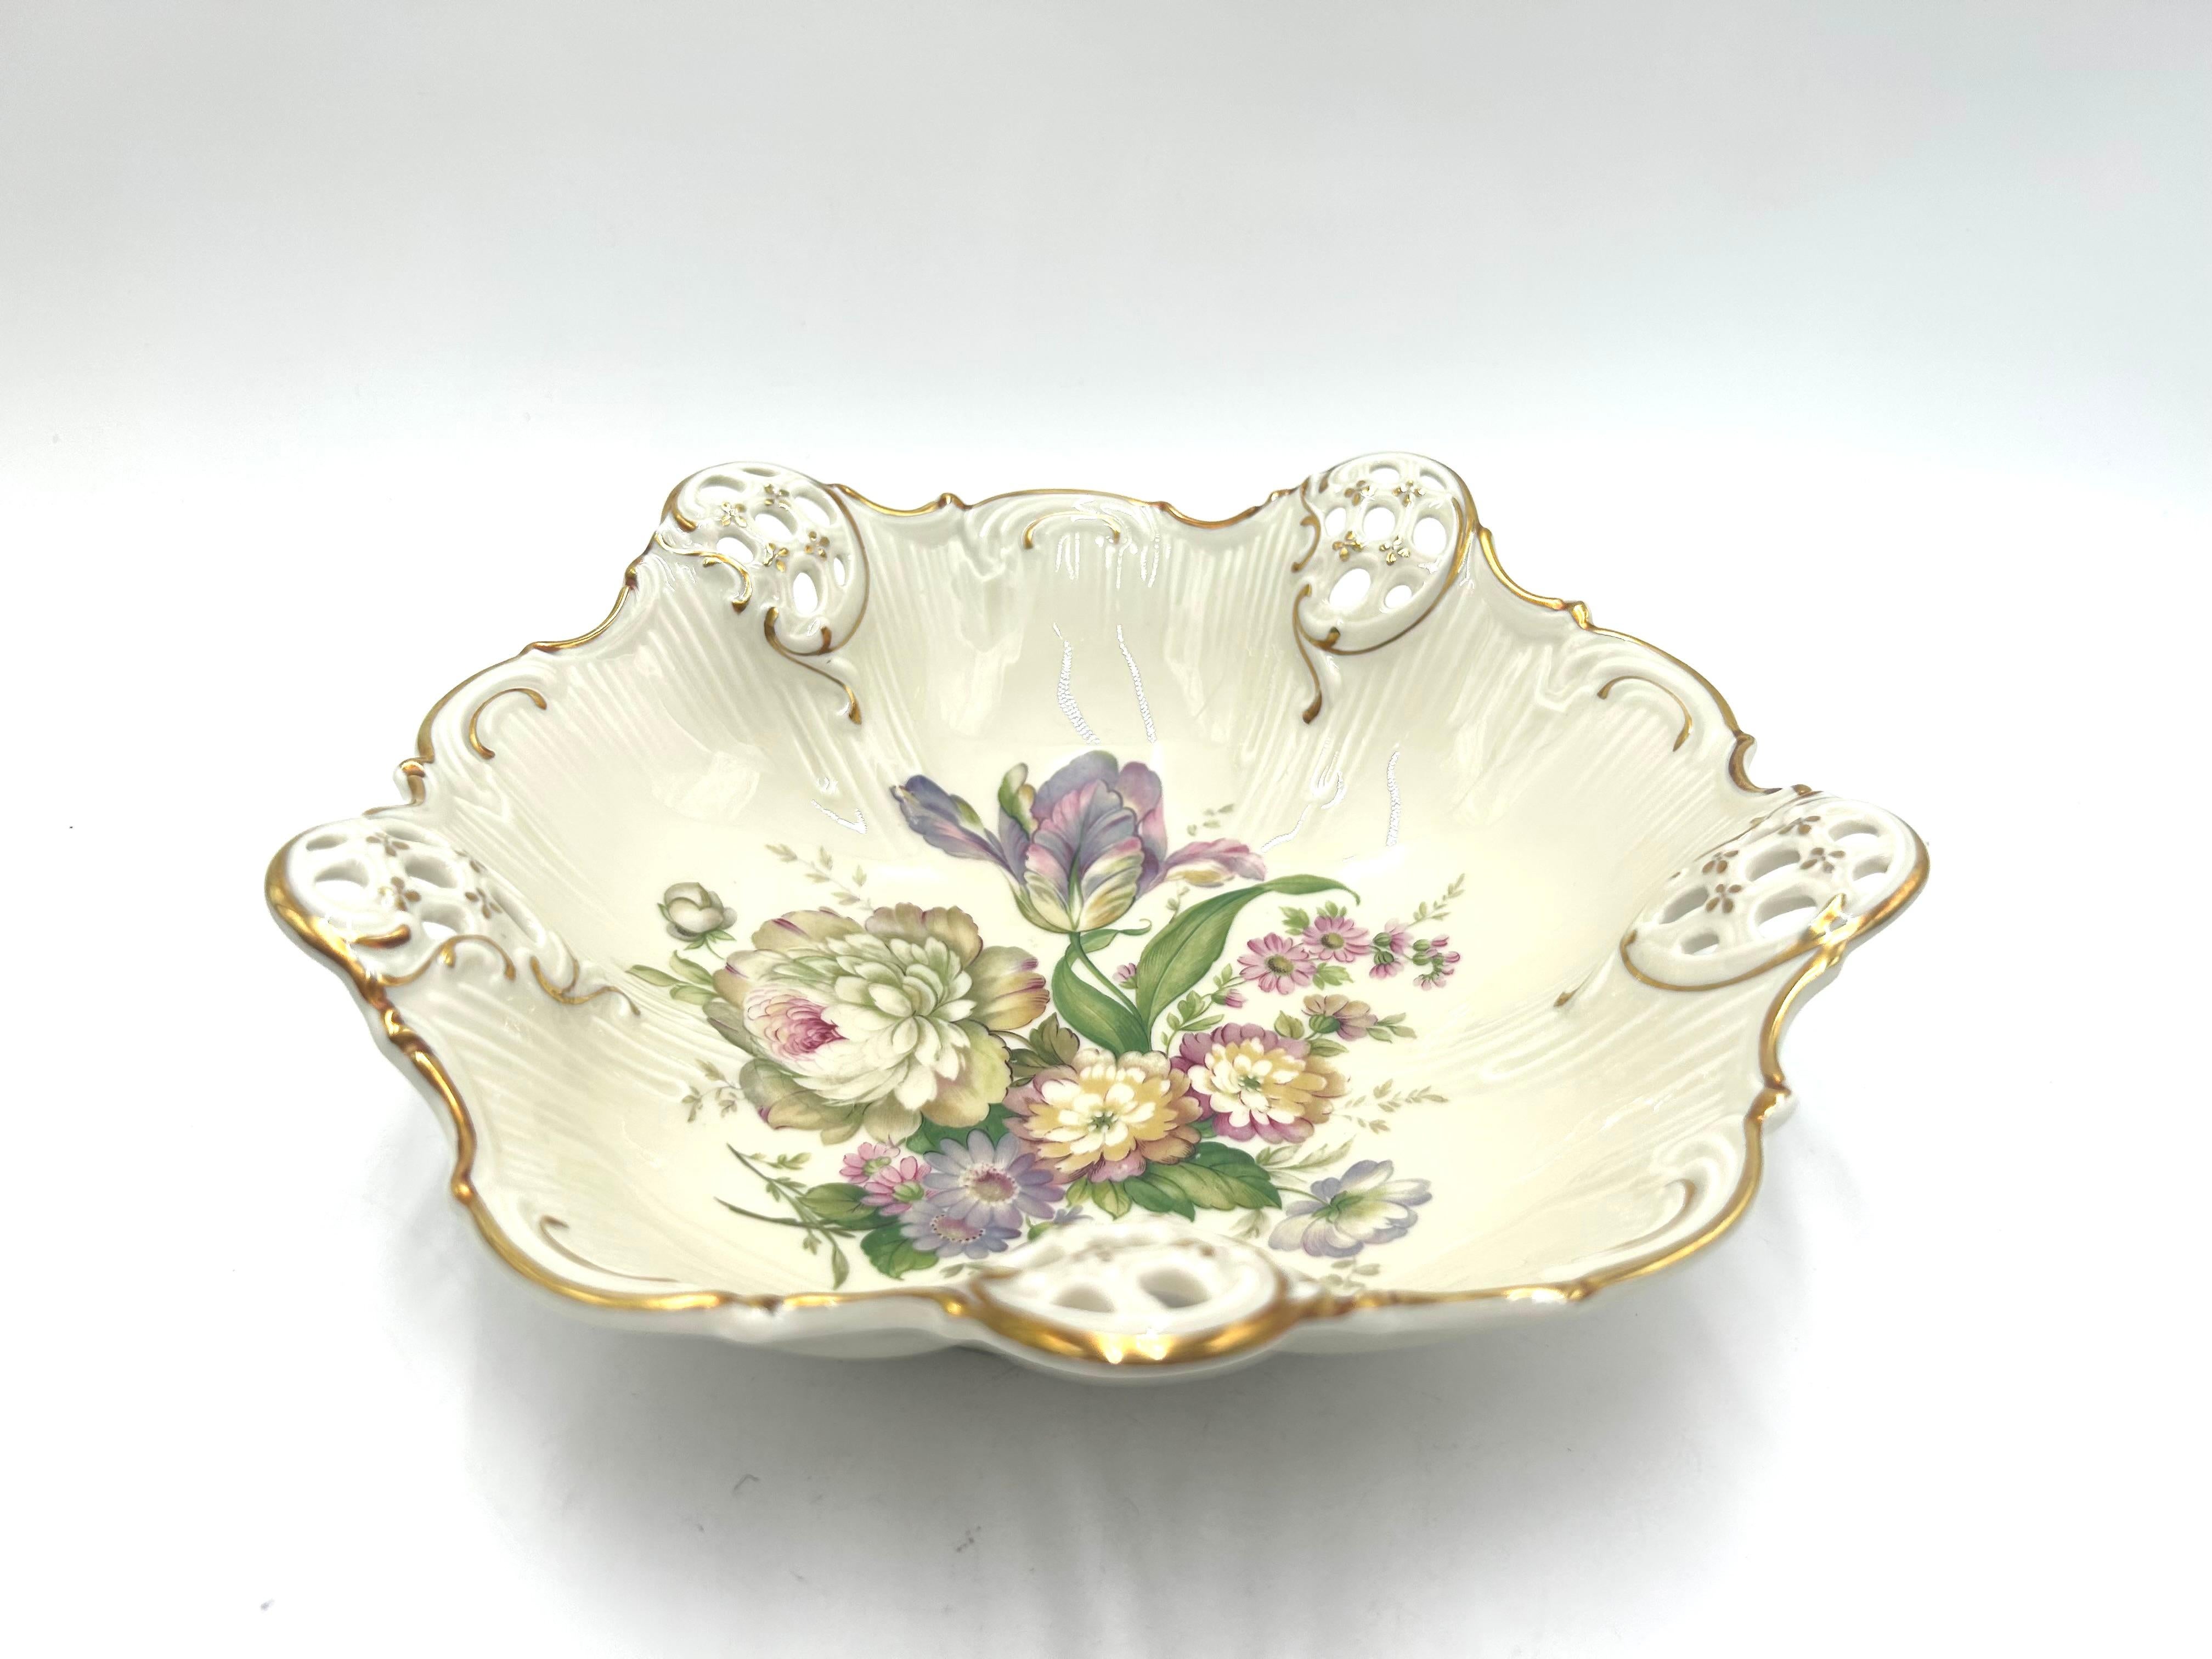 Mid-20th Century Porcelain Platter, Rosenthal Moliere, Germany, 1938-1952